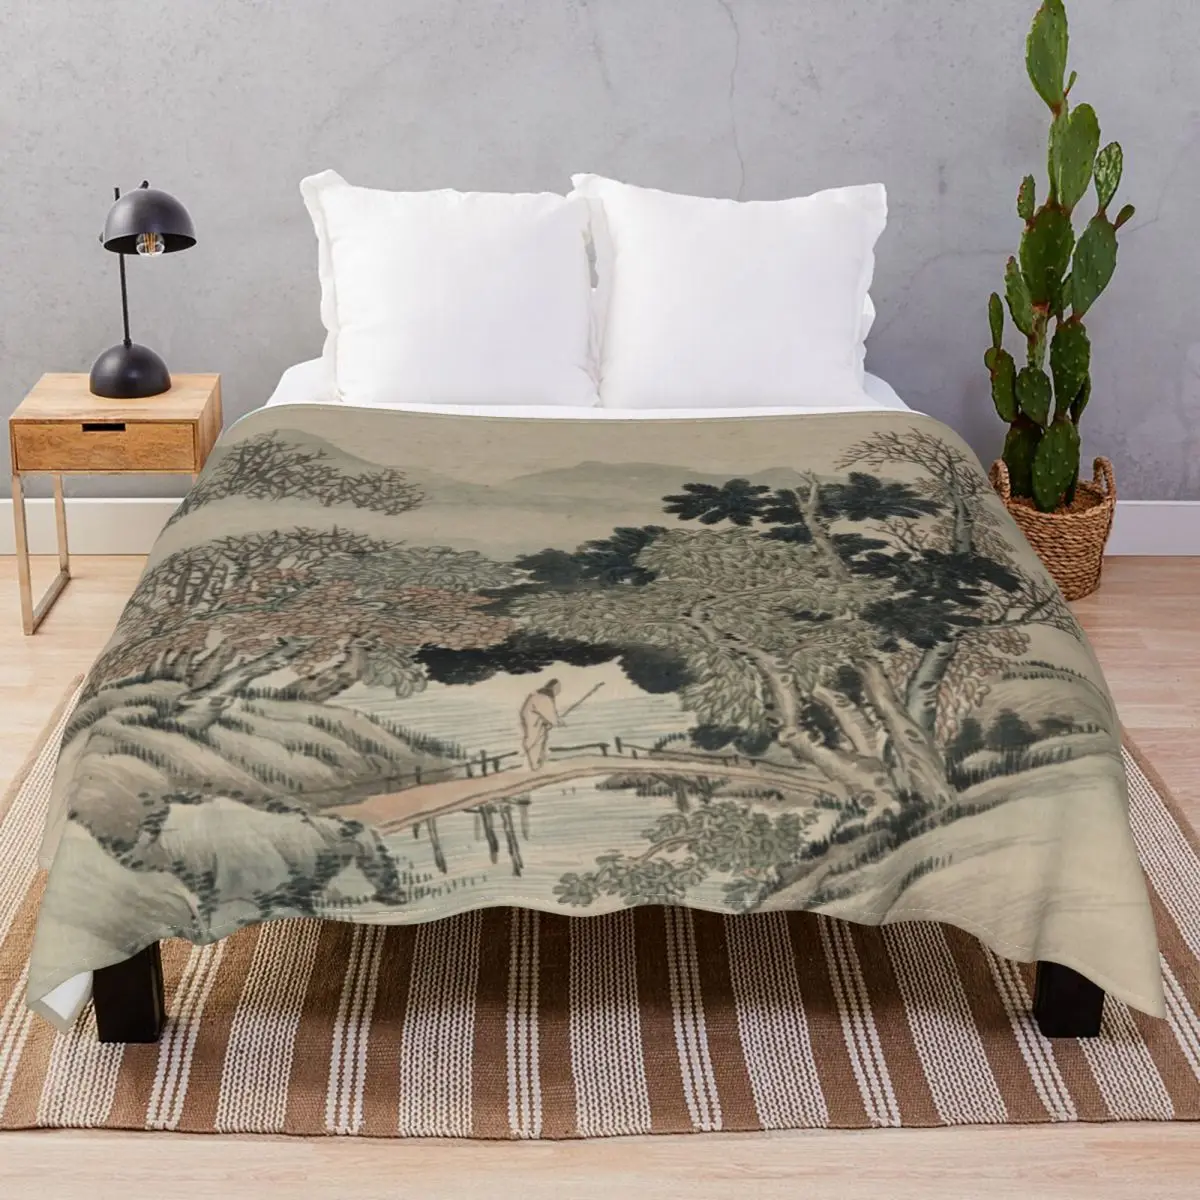 Vintage Landscape Painting Blanket Flannel All Season Lightweight Throw Blankets for Bedding Home Couch Travel Office